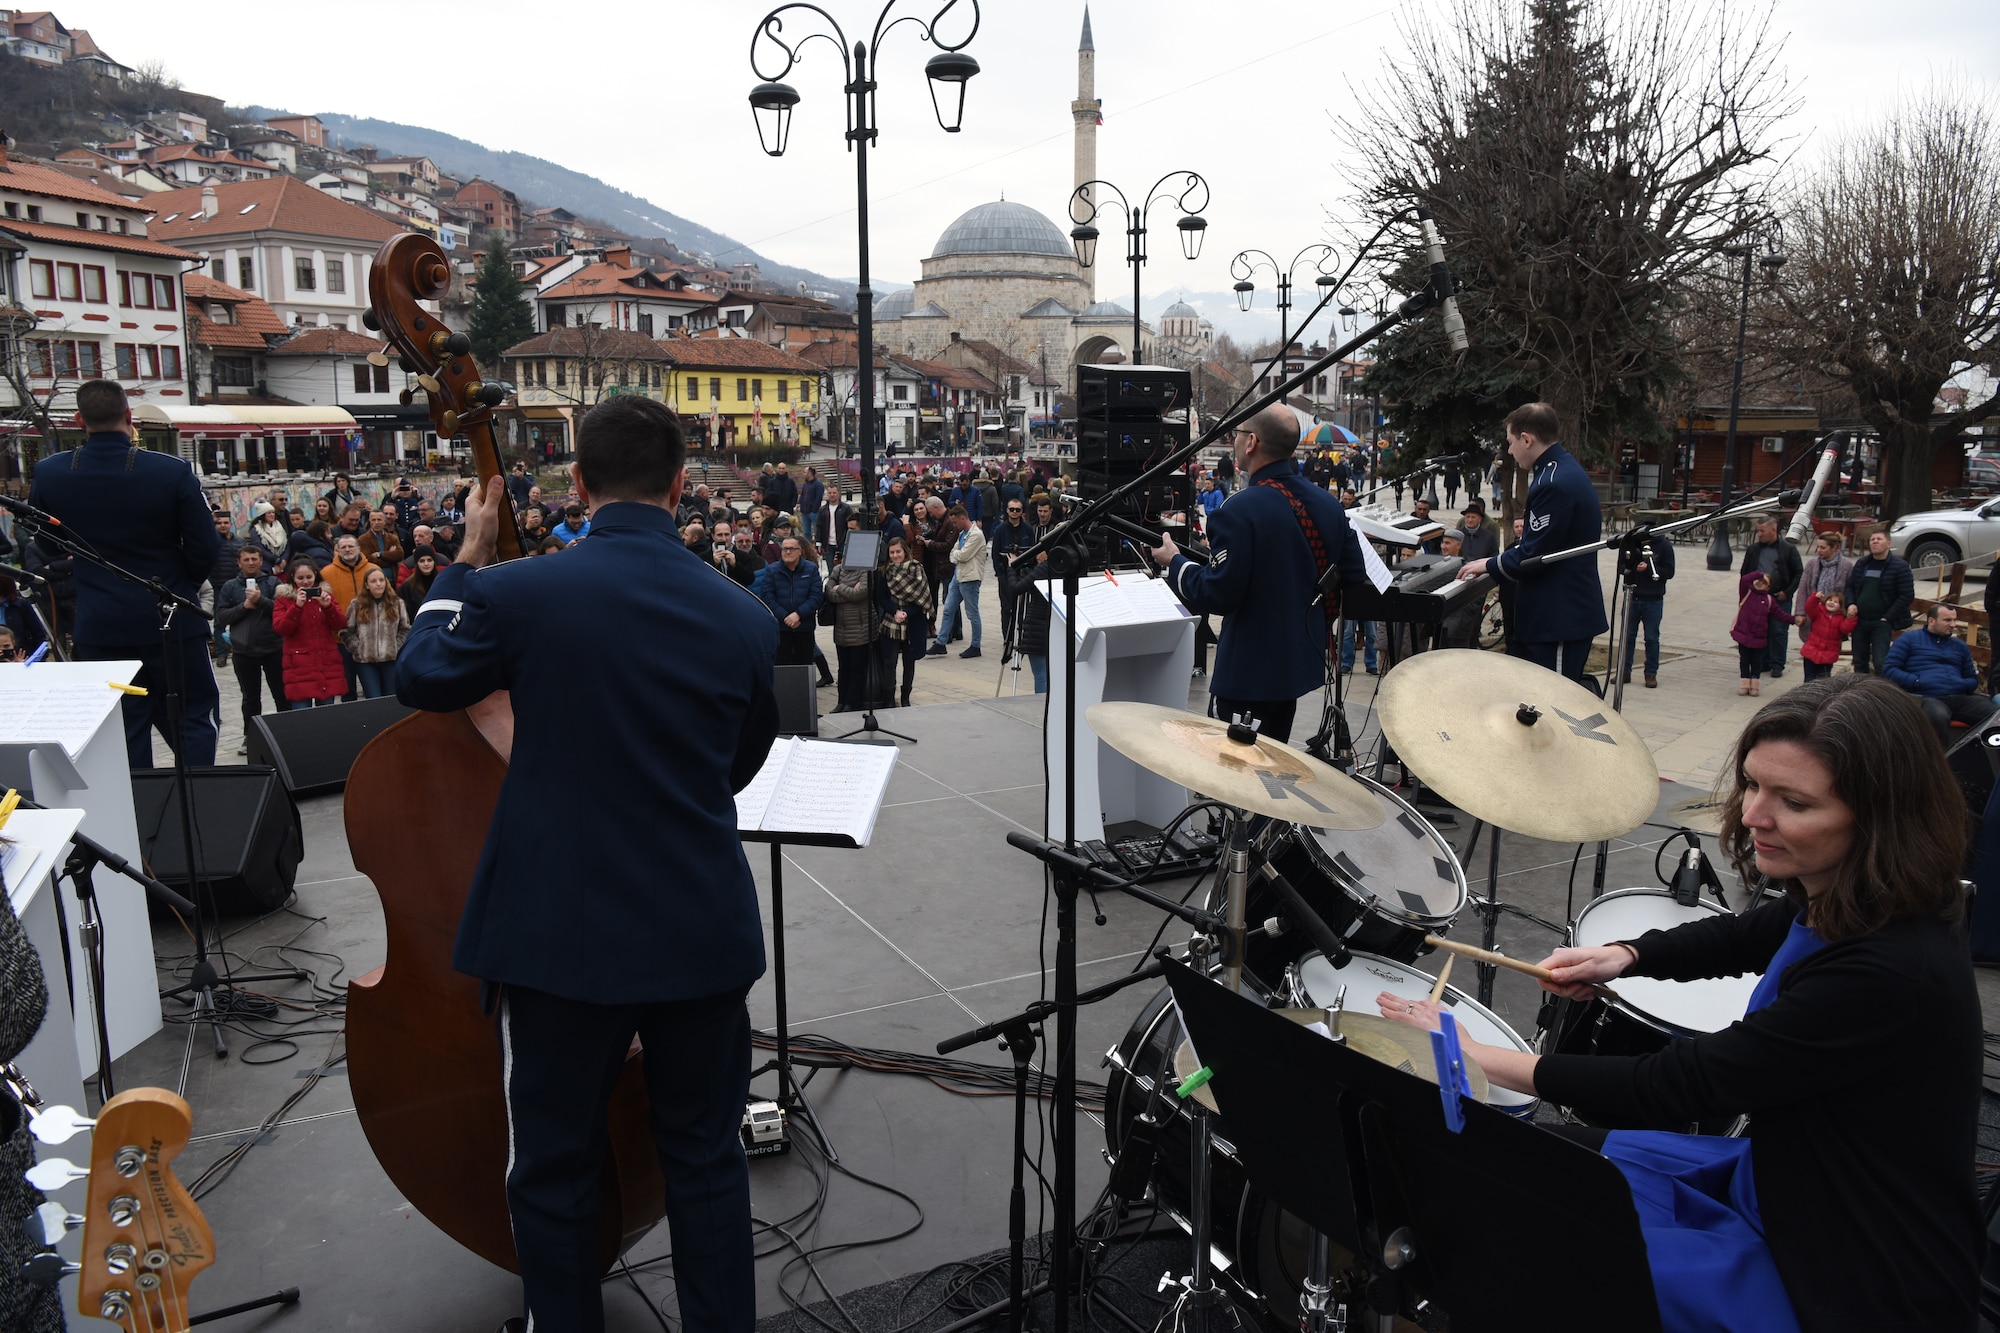 The U.S. Air Forces in Europe Band performs in Prizren, Kosovo, in celebration of the country’s 10th anniversary of independence, Feb. 18, 2018. Sitting in on drums is Erin Mains, a public diplomacy officer at the U.S. Embassy in Pristina. (U.S. Air Force photo by Maj. Tristan Hinderliter)